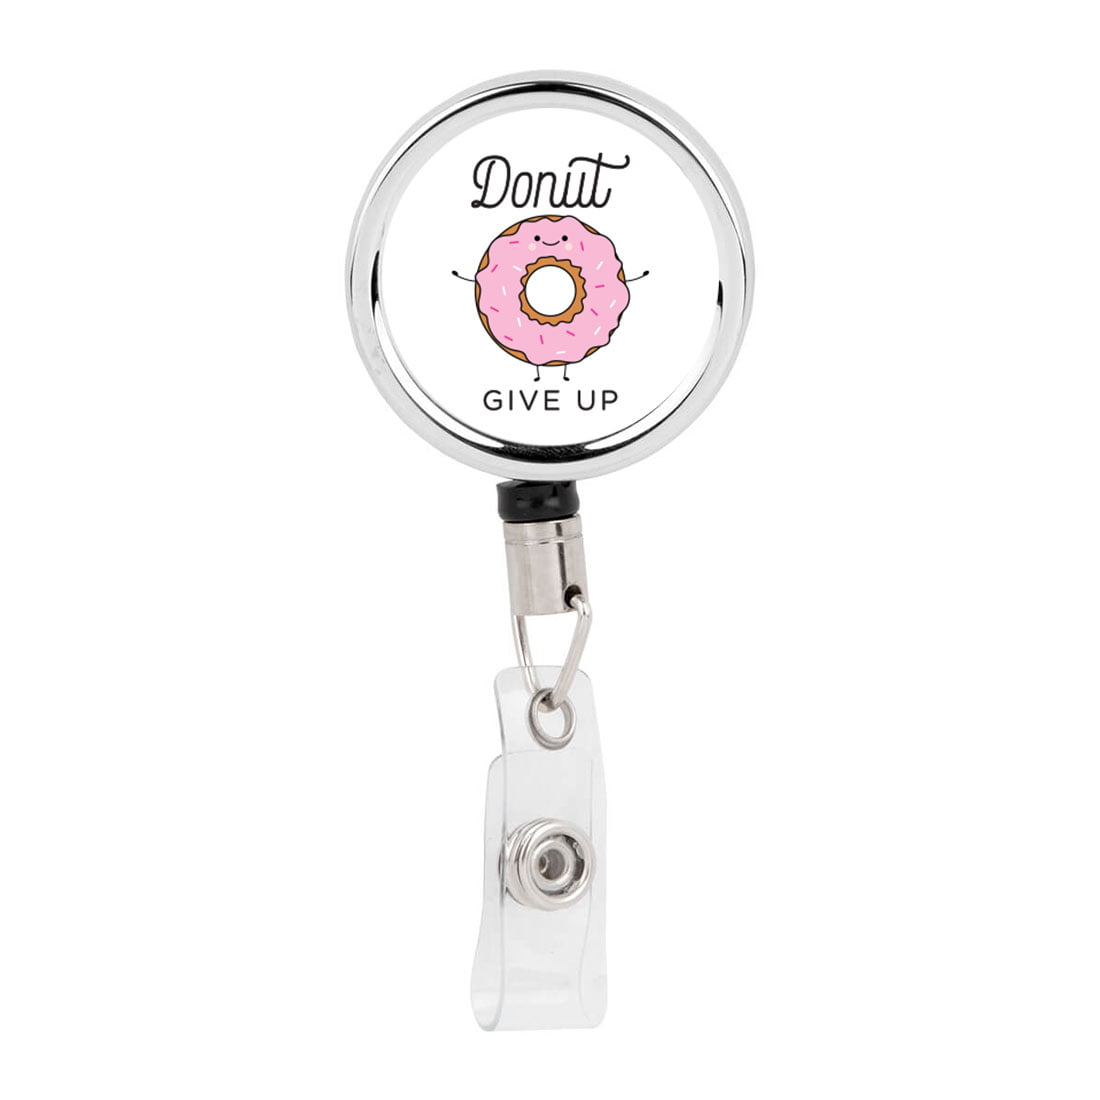 Koyal Wholesale Retractable Badge Reel Holder With Clip, Donut